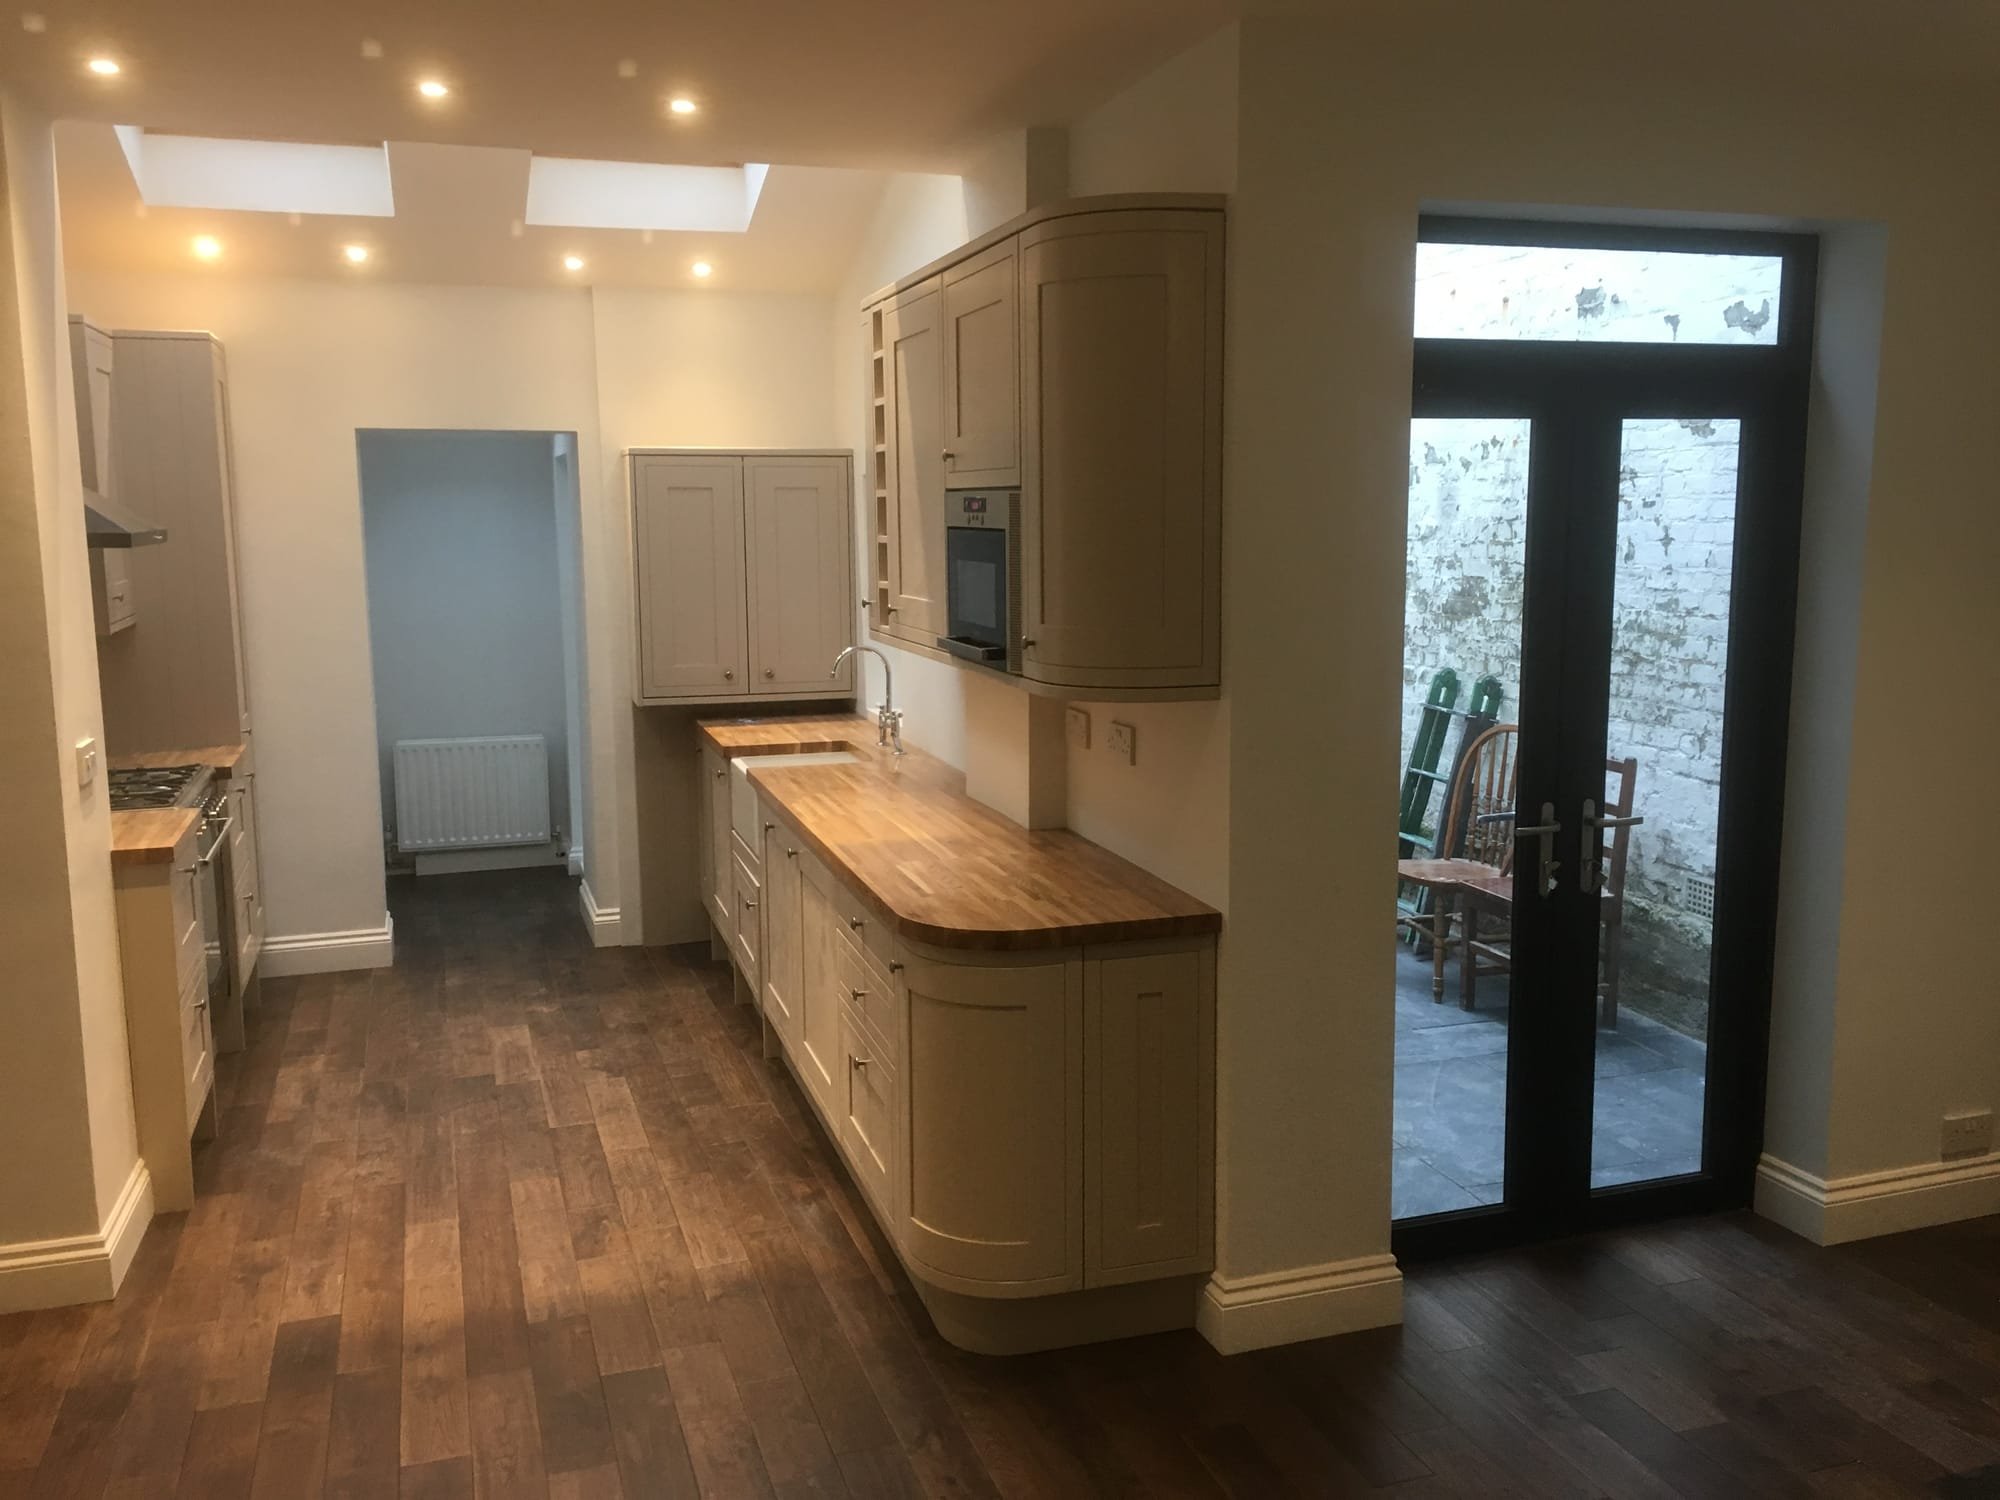 Rear kitchen extension and cloakroom with new French doors and new flooring throughout groudn floor in Wandsworth, Balham, SW12